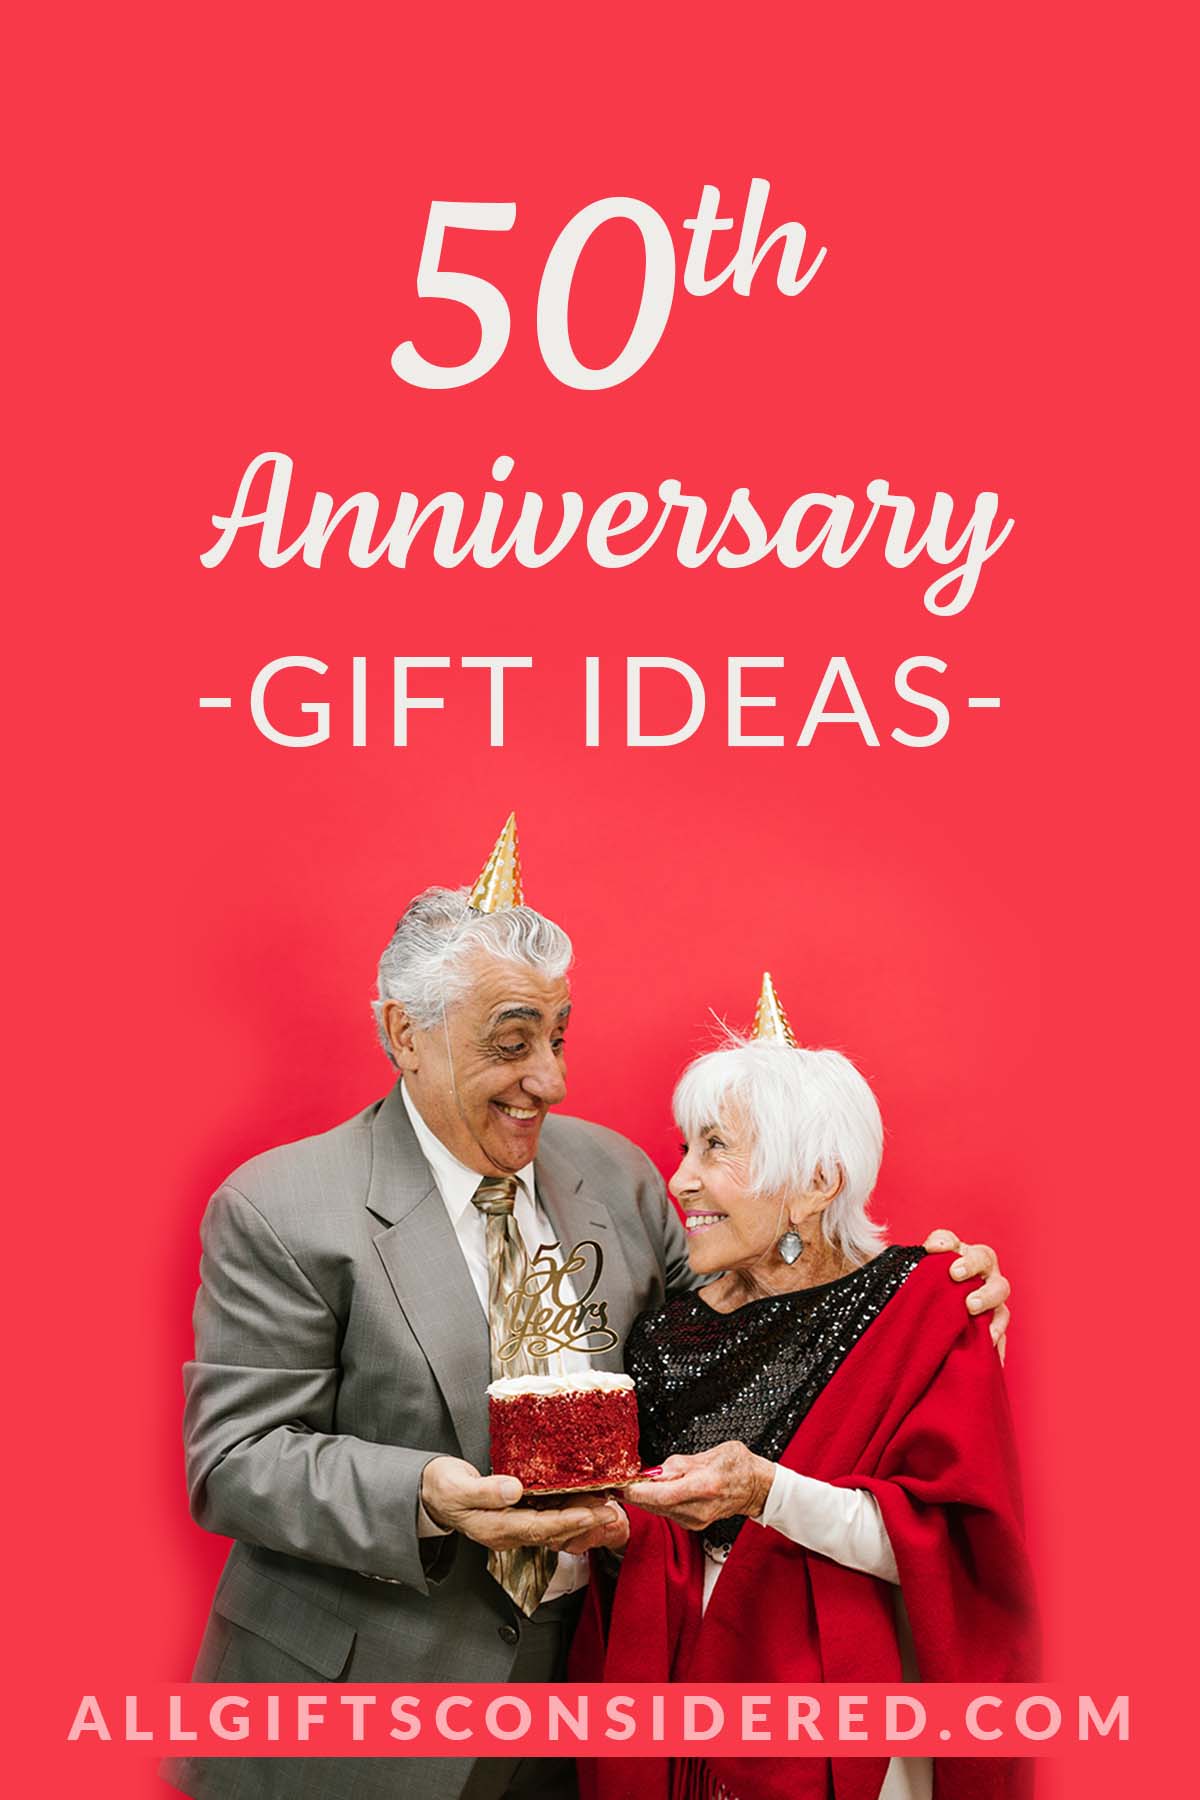 50th anniversary gifts - Feat Image